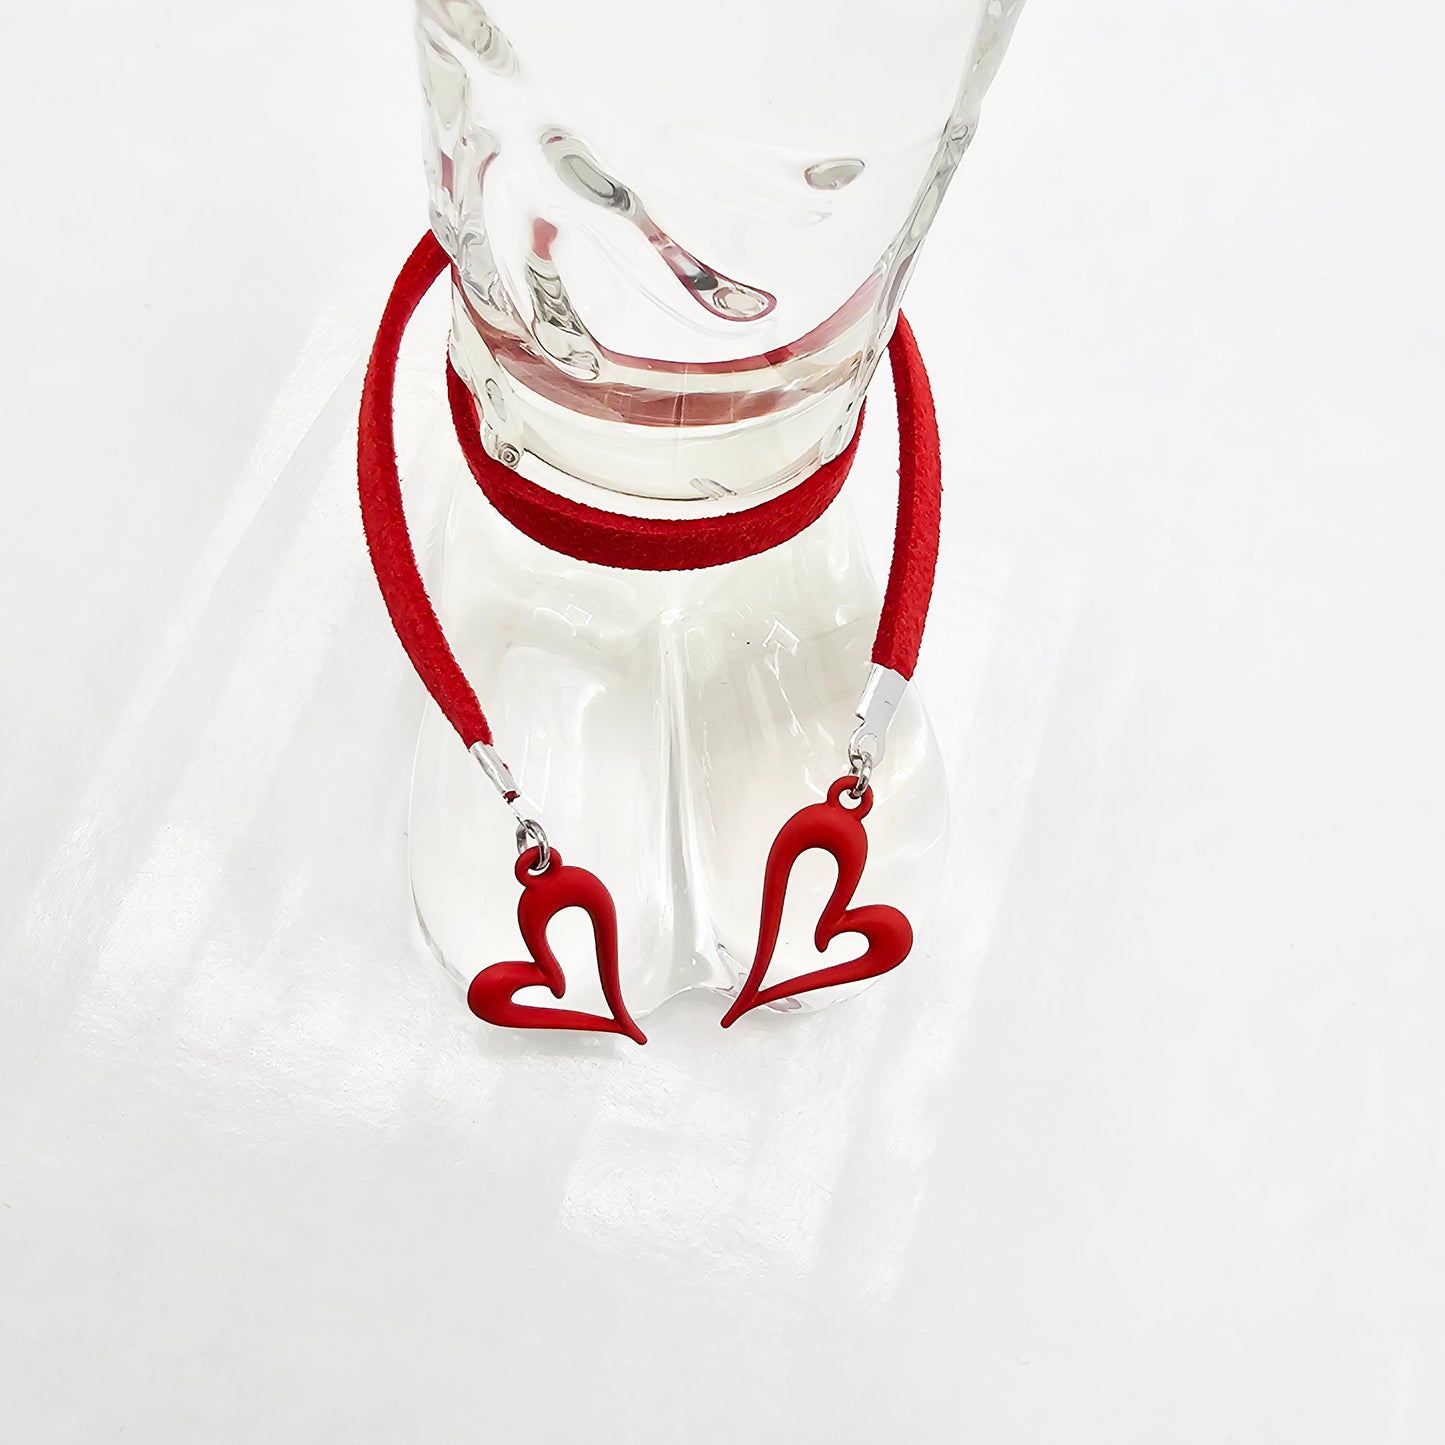 Naughty Penis Jewelry for Men's Valentine's Day Gift. Red Penis Noose with Hearts.